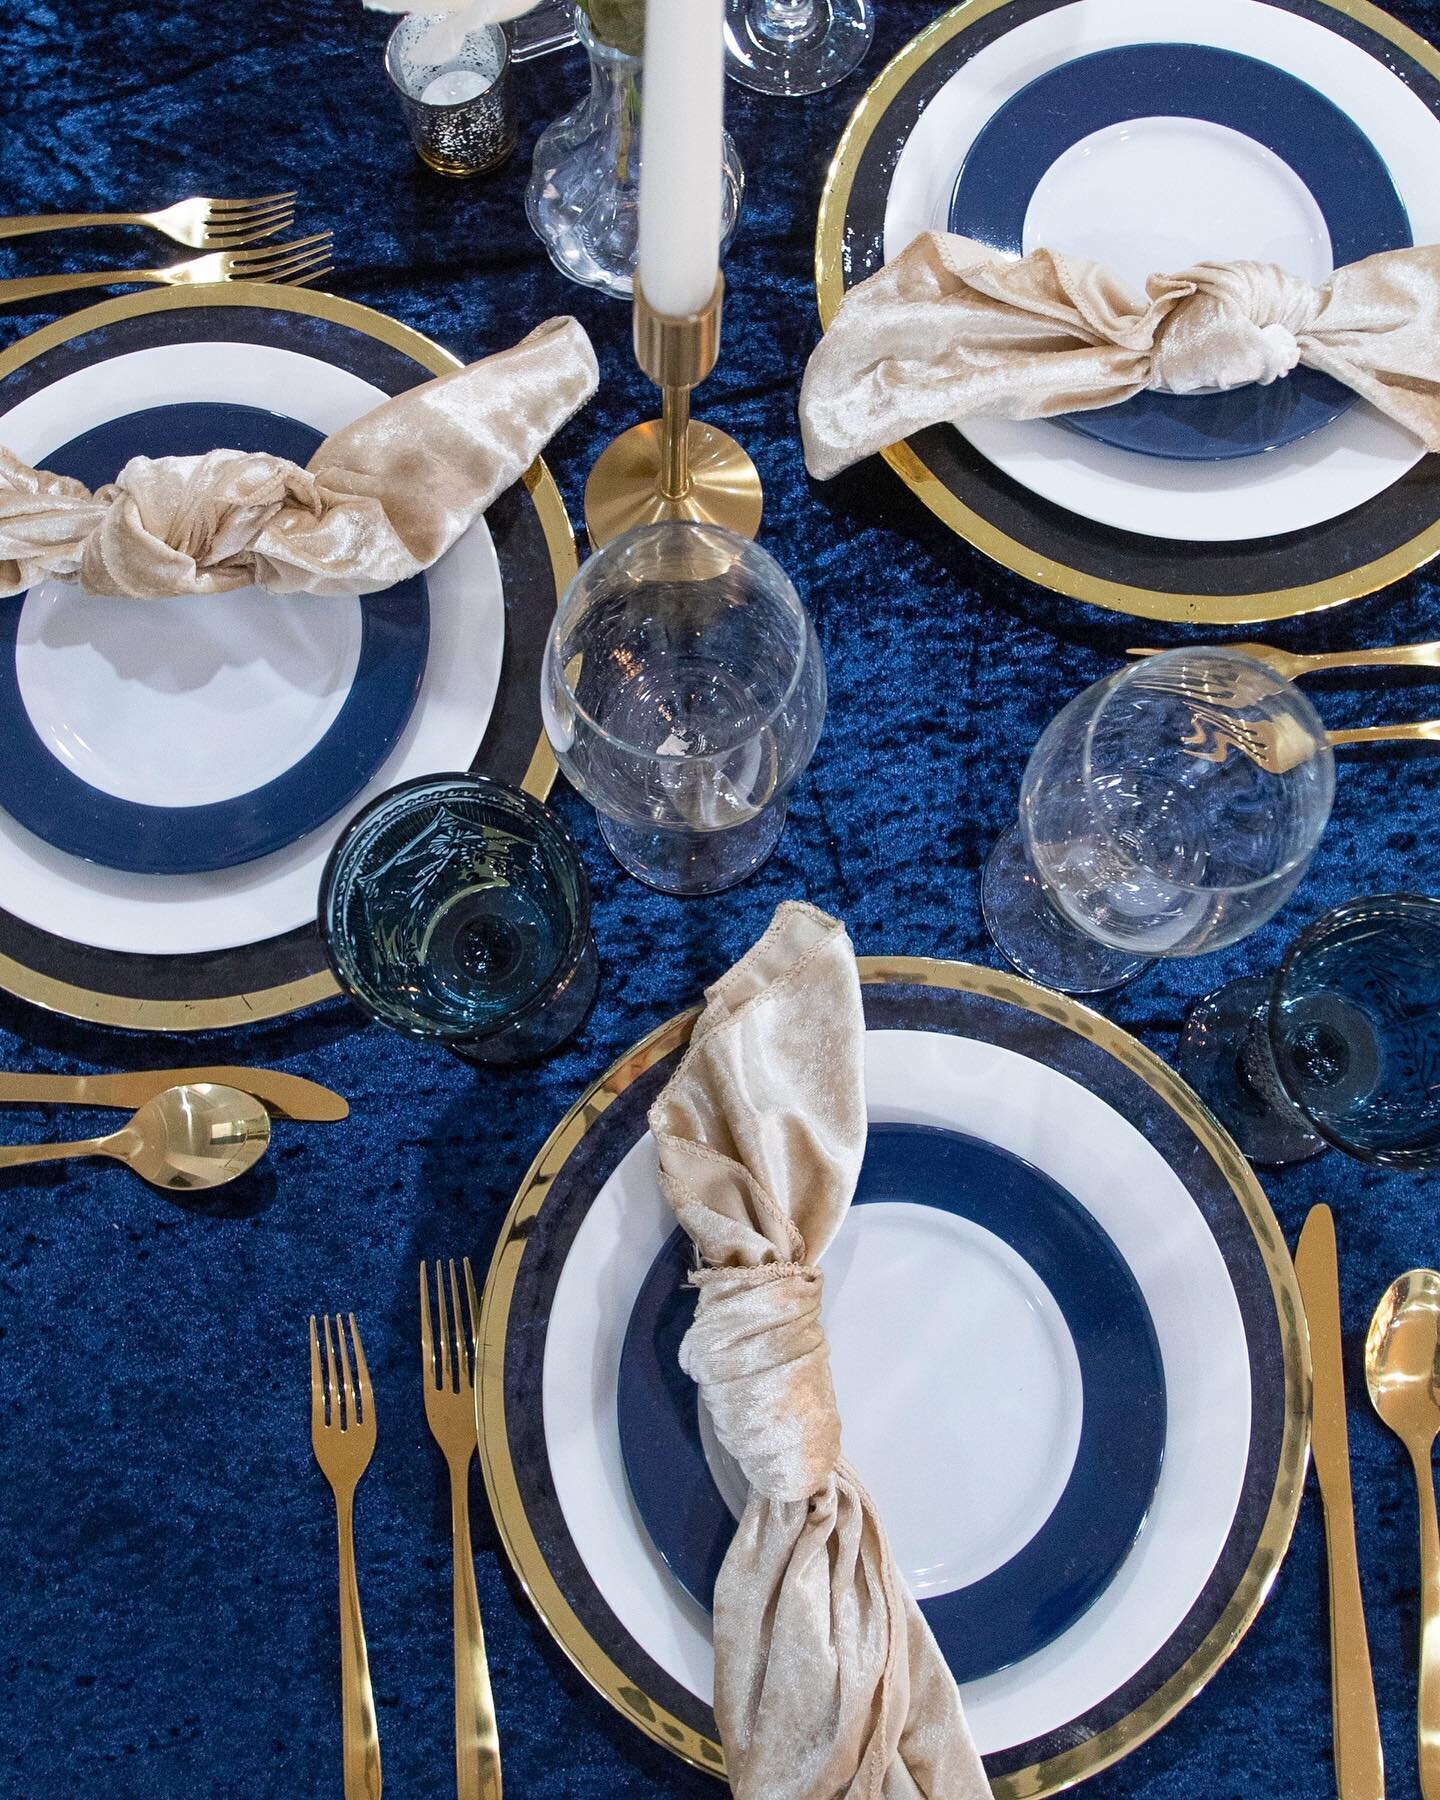 there really is nothing like crushed blue velvet imo 💙 these gorgeous details are by @voltaireluxe.co for a very special RN graduation dinner.
.
.
#bostonphotographer #bostoneventdecor #bostonevents #bostonevent #bostoneventphotographer #bostonevent